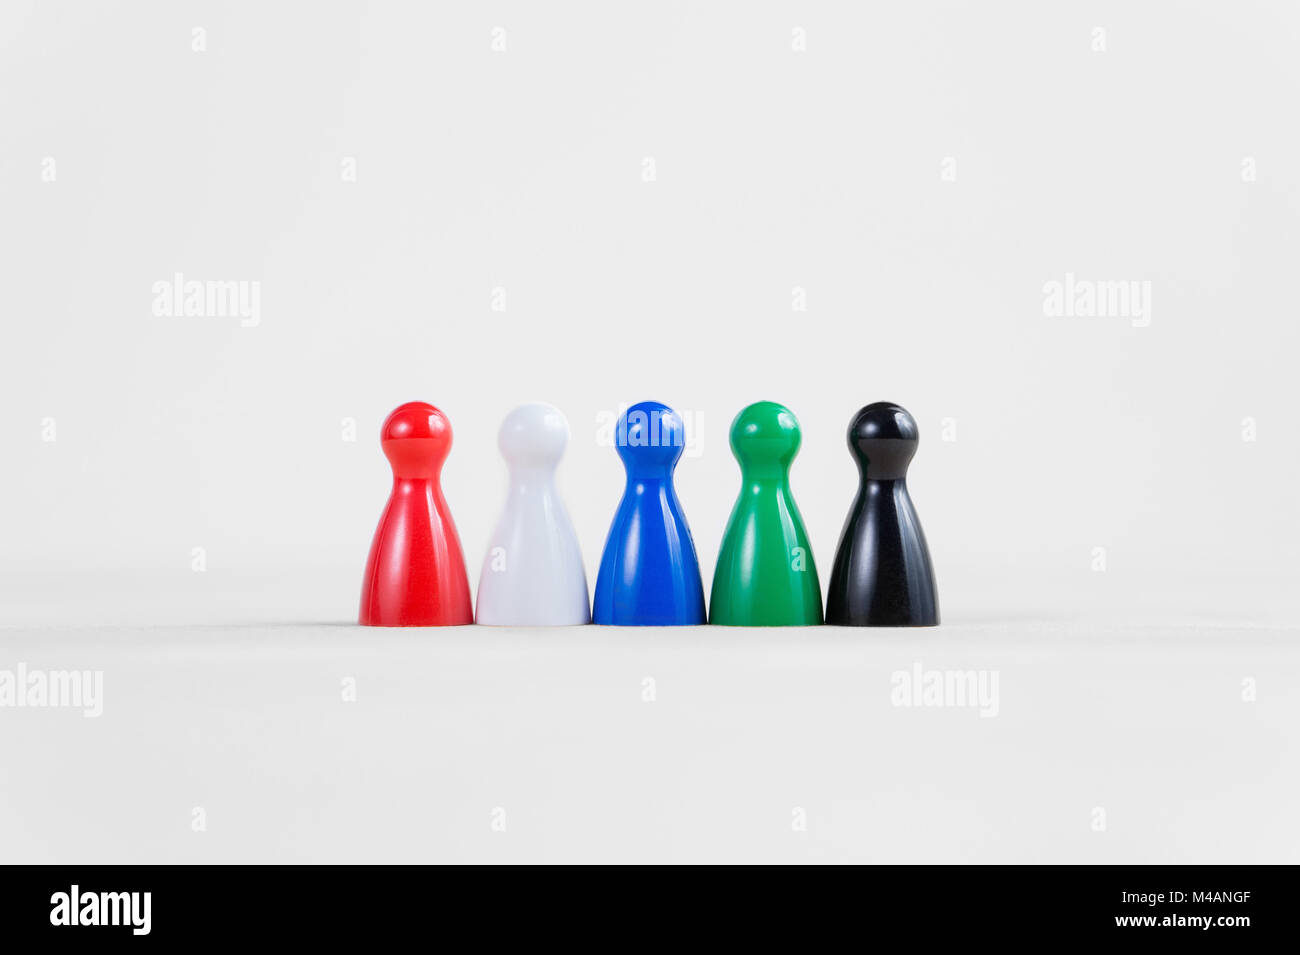 Colorful board game pawns in a row with copy space. Suitable for business concept such as teamwork, recruiting, cooperation and working together. Stock Photo